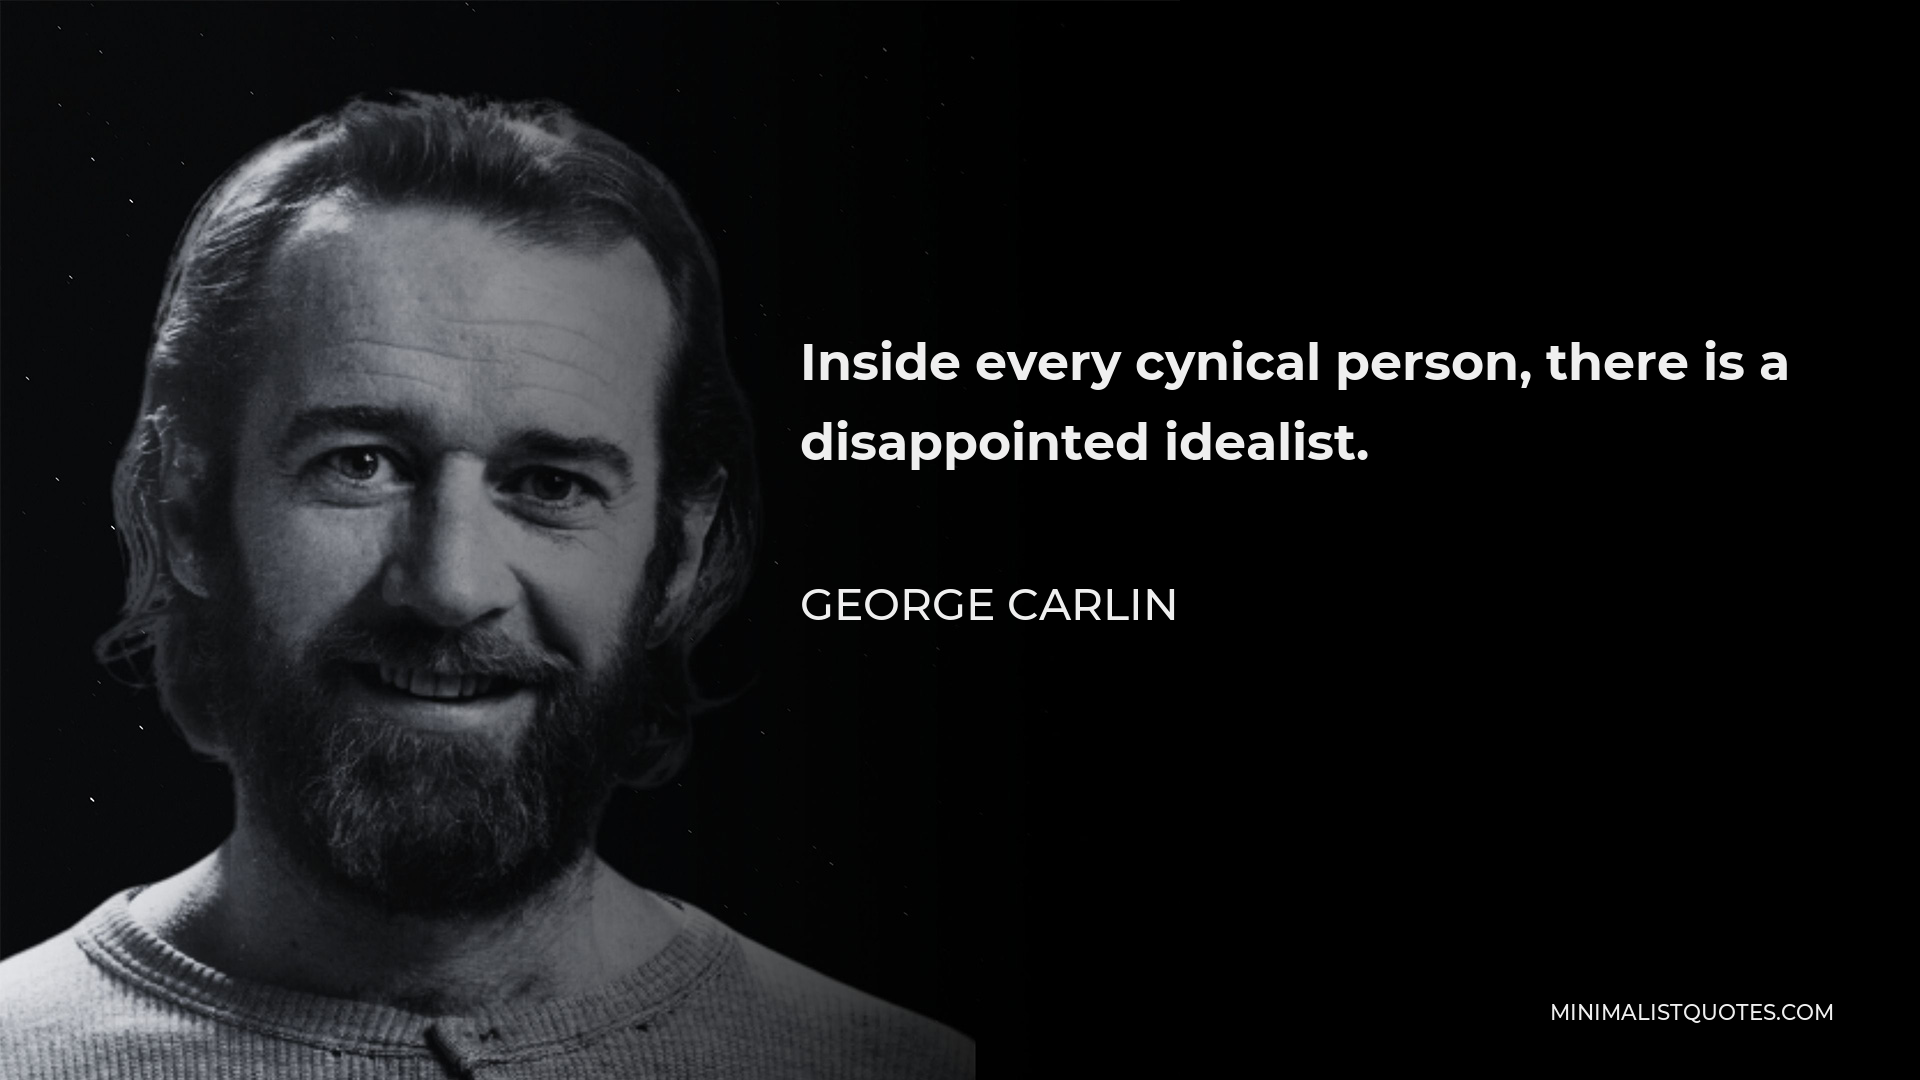 George Carlin Quote - Inside every cynical person, there is a disappointed idealist.